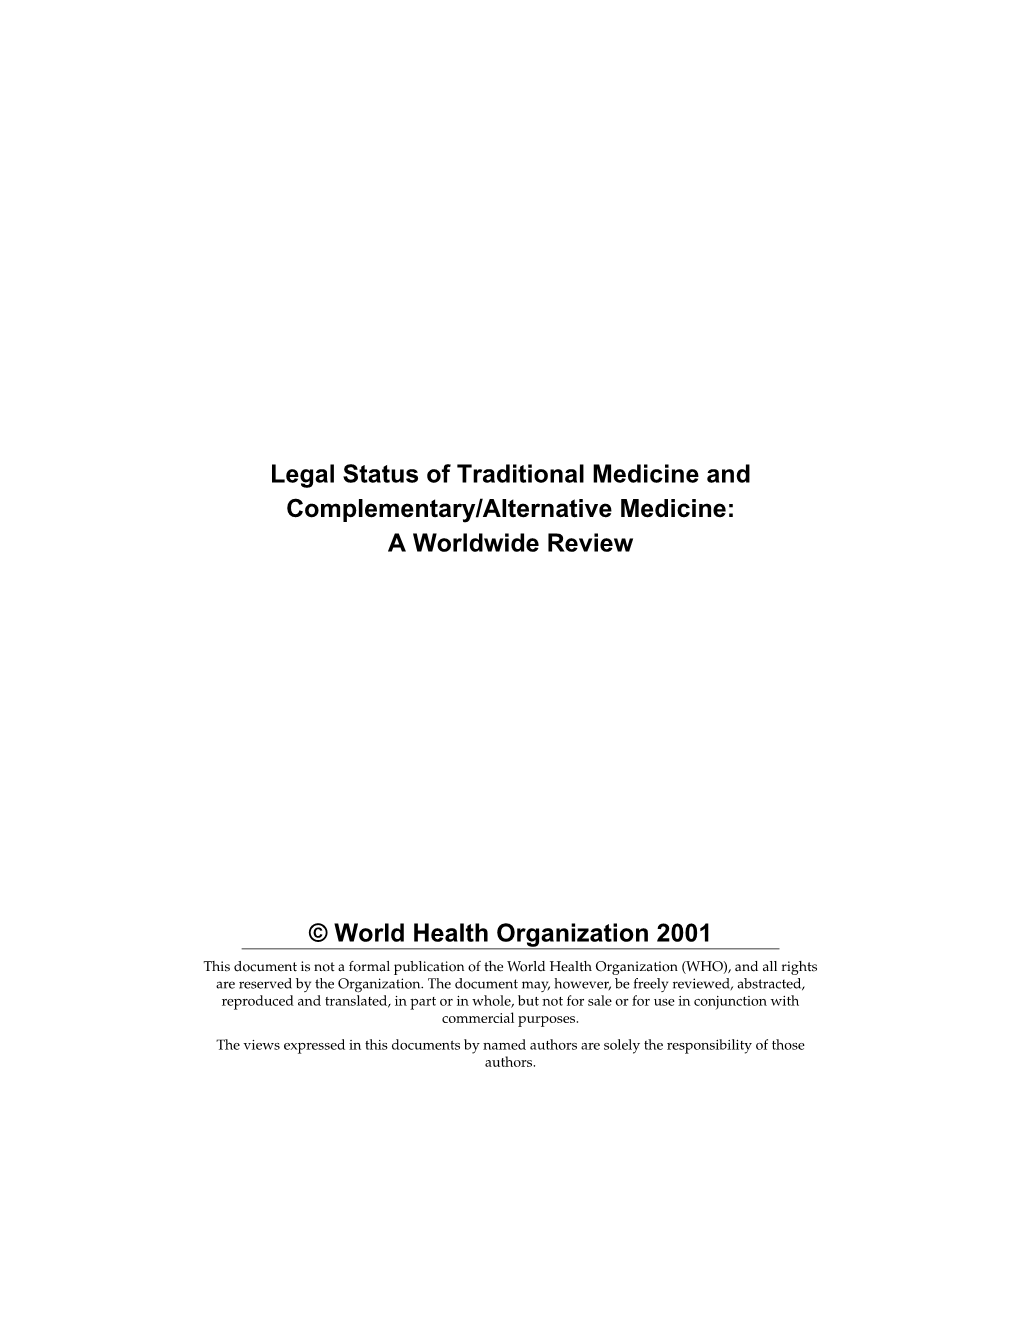 Legal Status of Traditional Medicine and Complementary/Alternative Medicine: a Worldwide Review